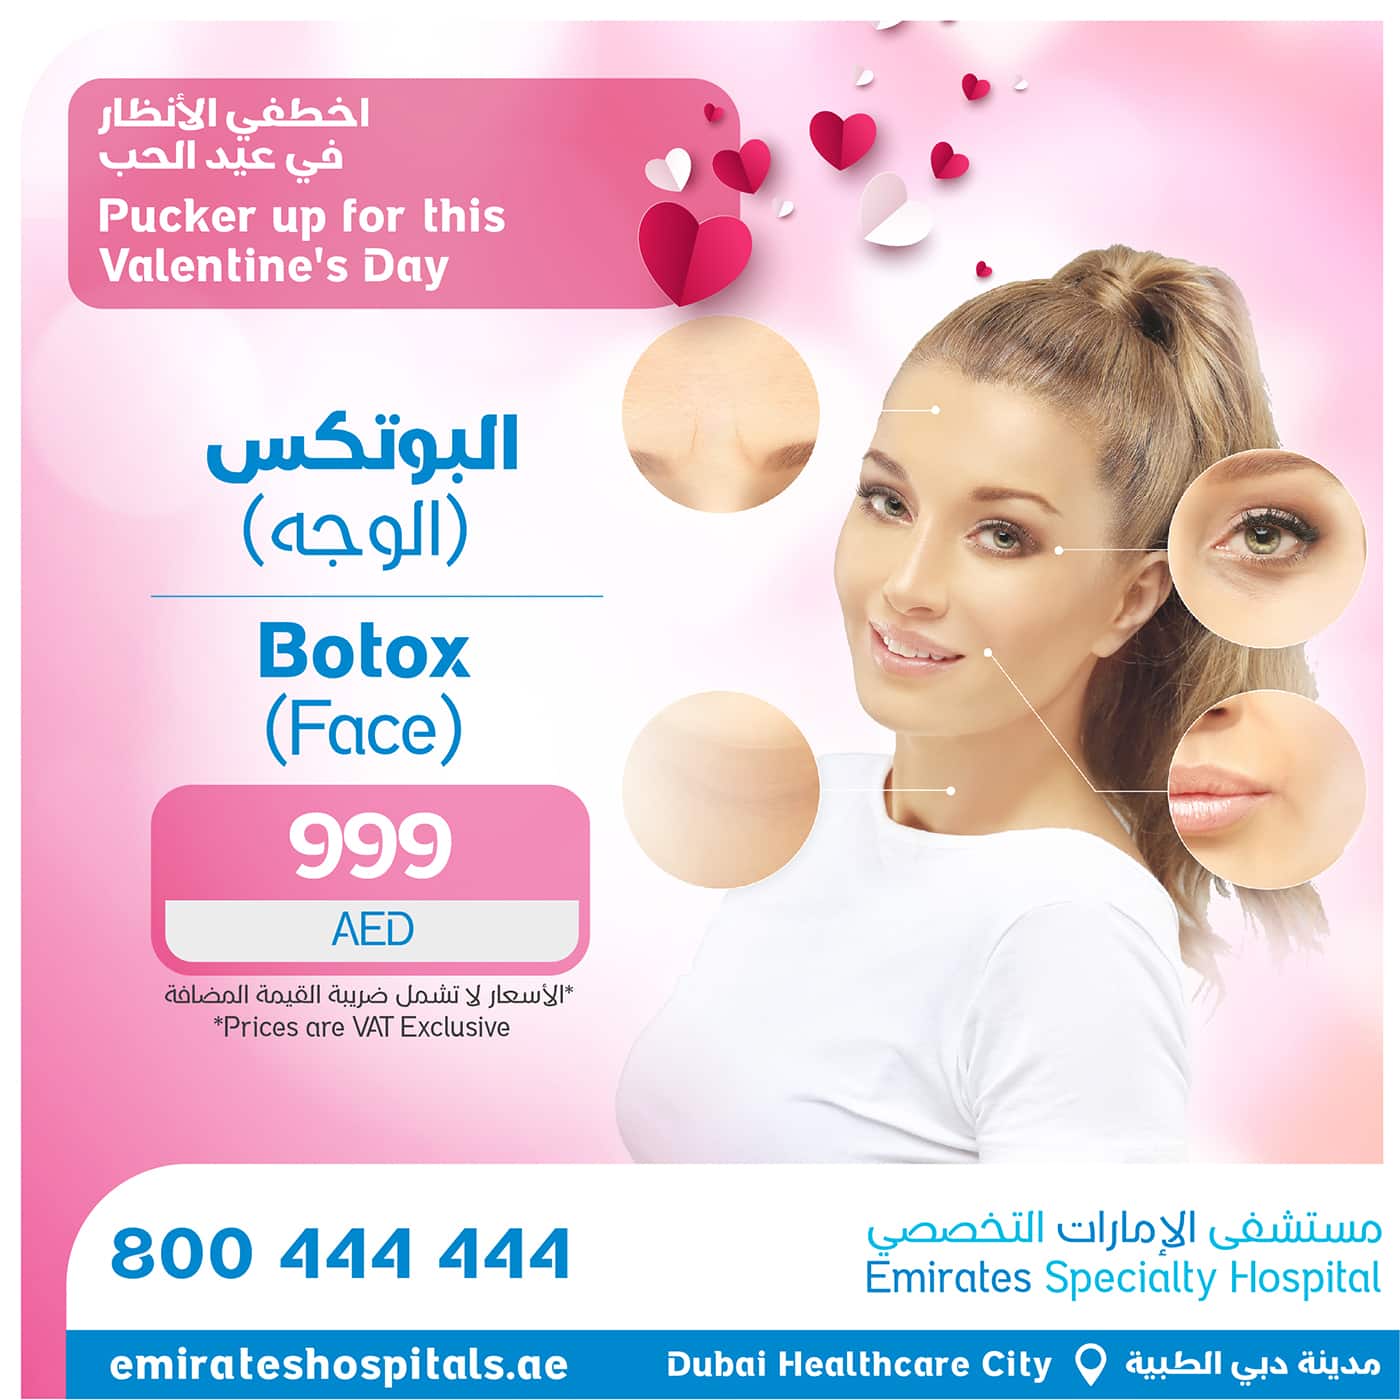 Valentine’s Day Dermatology Special Offers Emirates Specialty Hospital DHCC